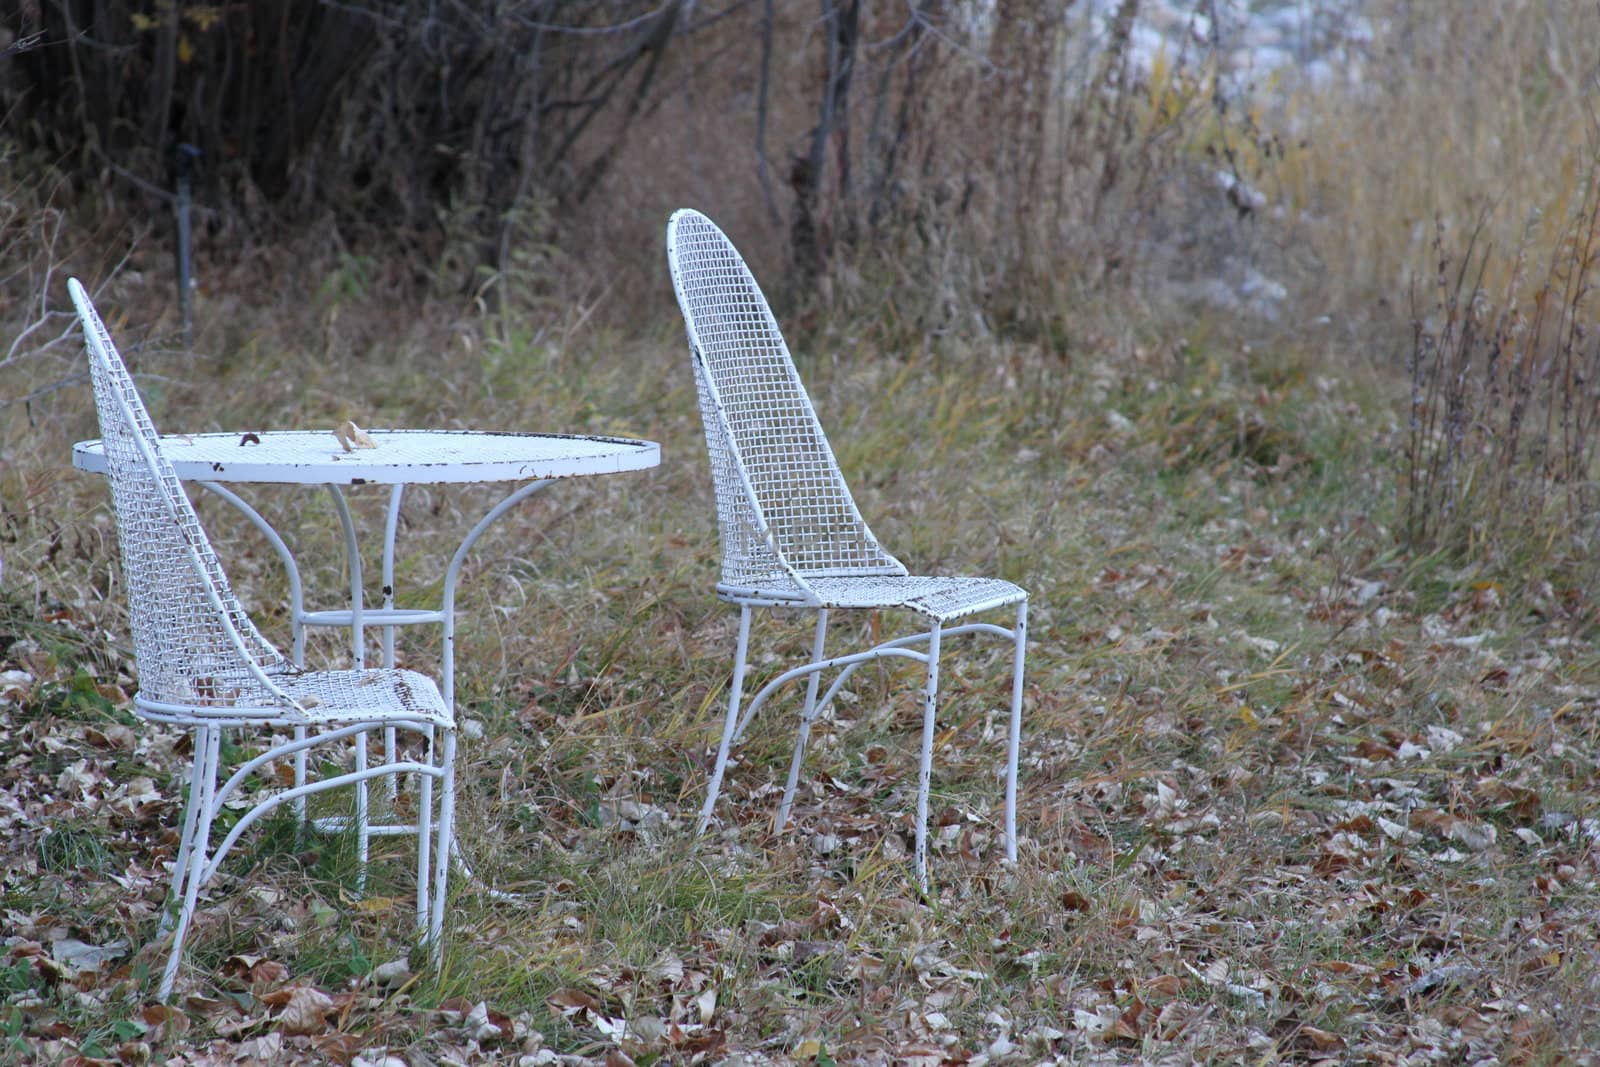 Lawn furniture in the woods by skater-girls.com